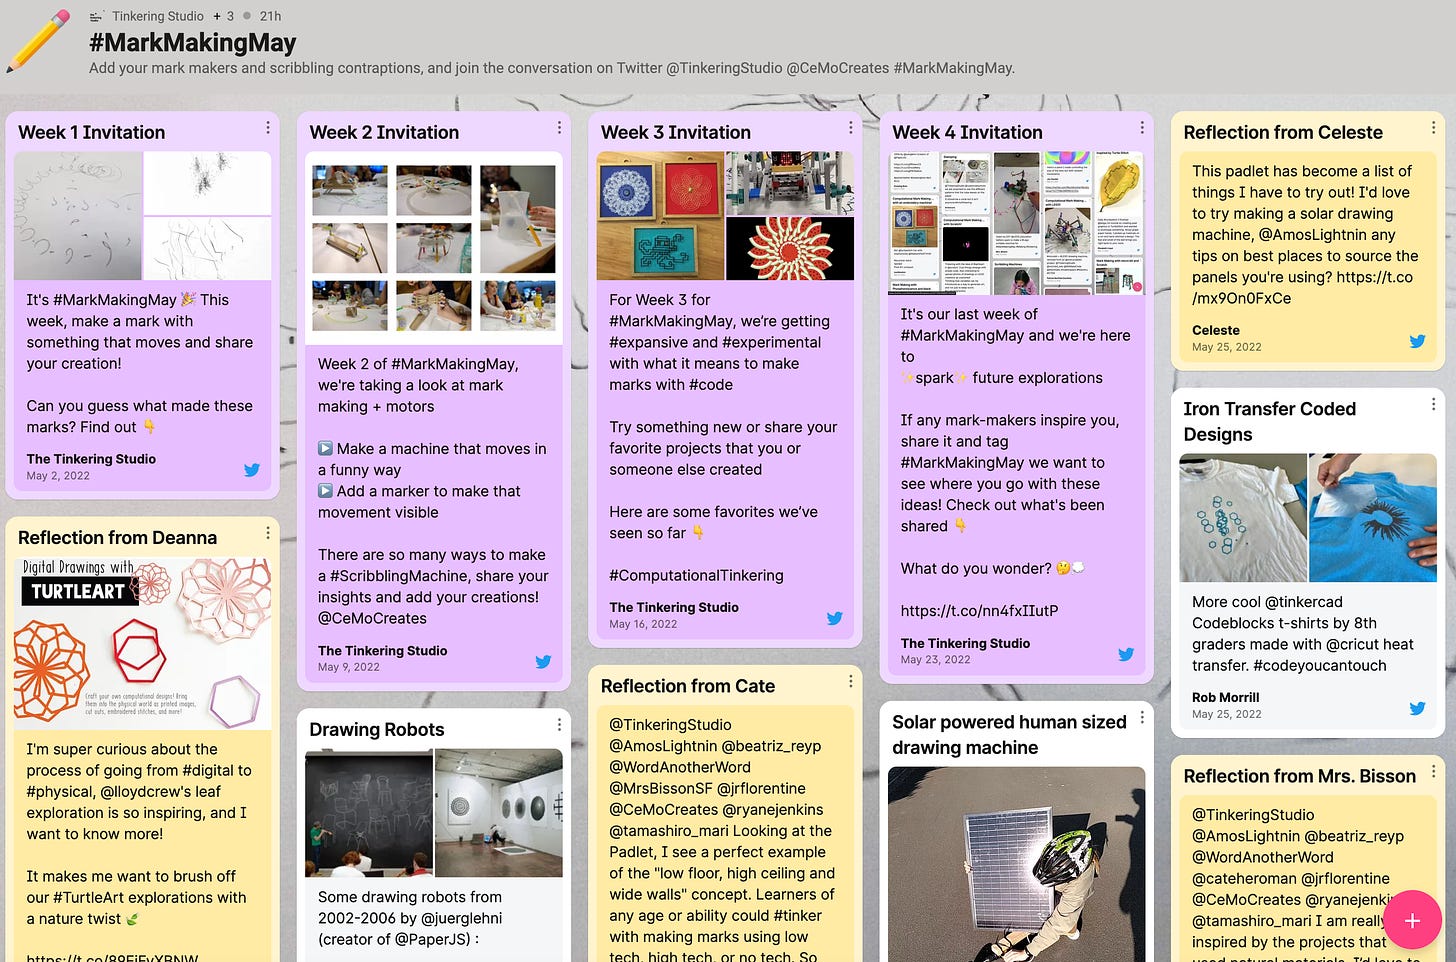 A screencapture of a padlet gallery titled #markMakingMay. Several posts are included in the image. Some of the posts highlight invitations for each week of Mark Making May, some are reflections from people who participated, and some are examples of mark making projects. Many of the posts are links to twitter posts.